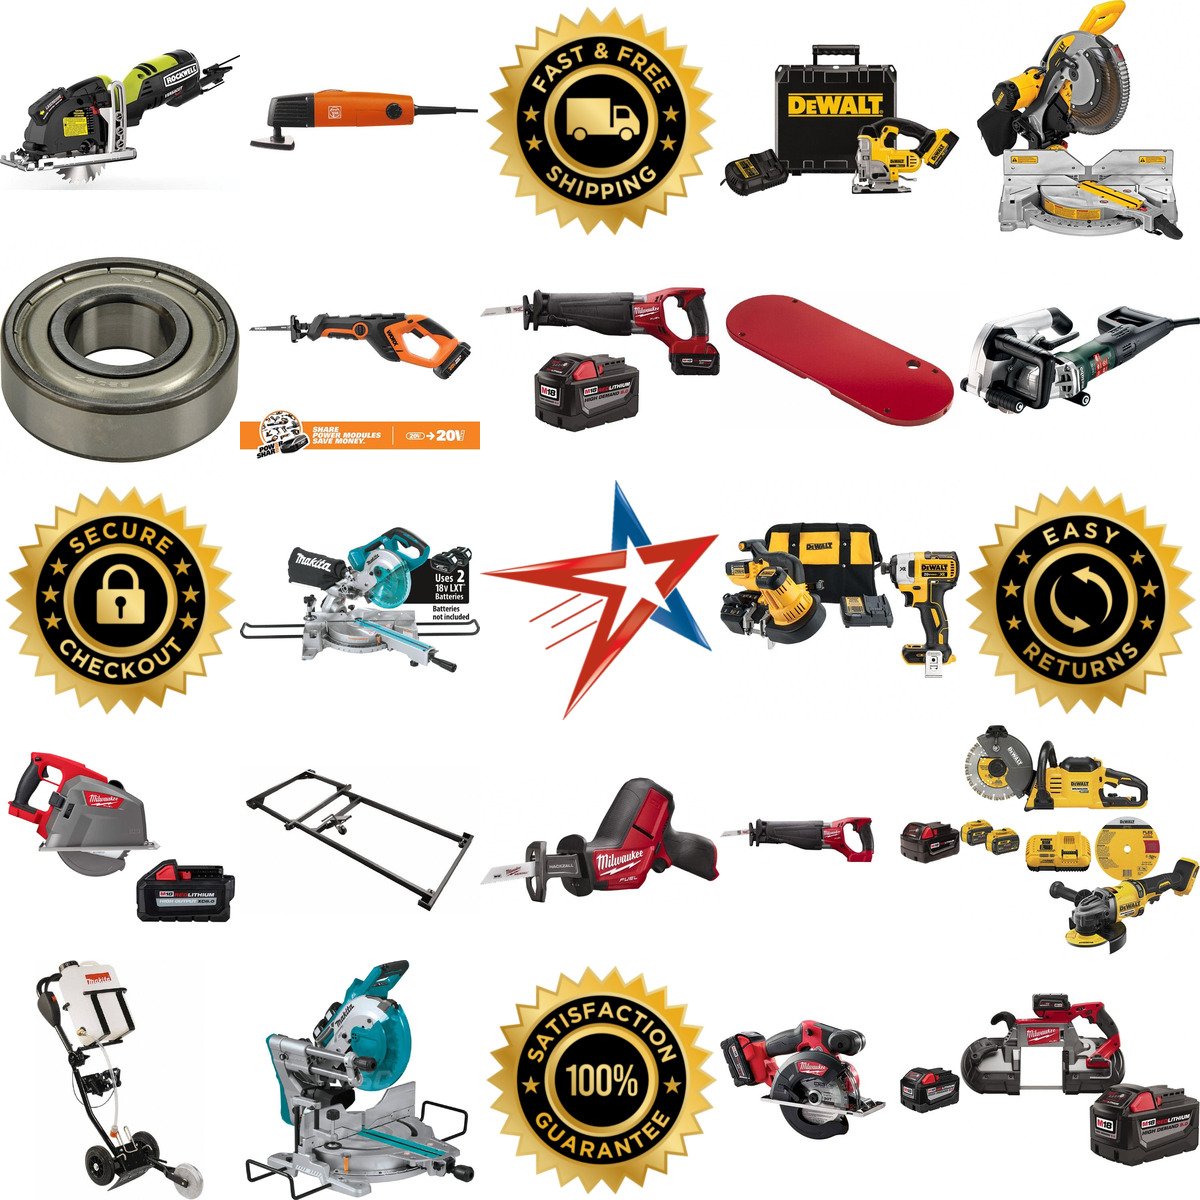 A selection of Power Saws products on GoVets